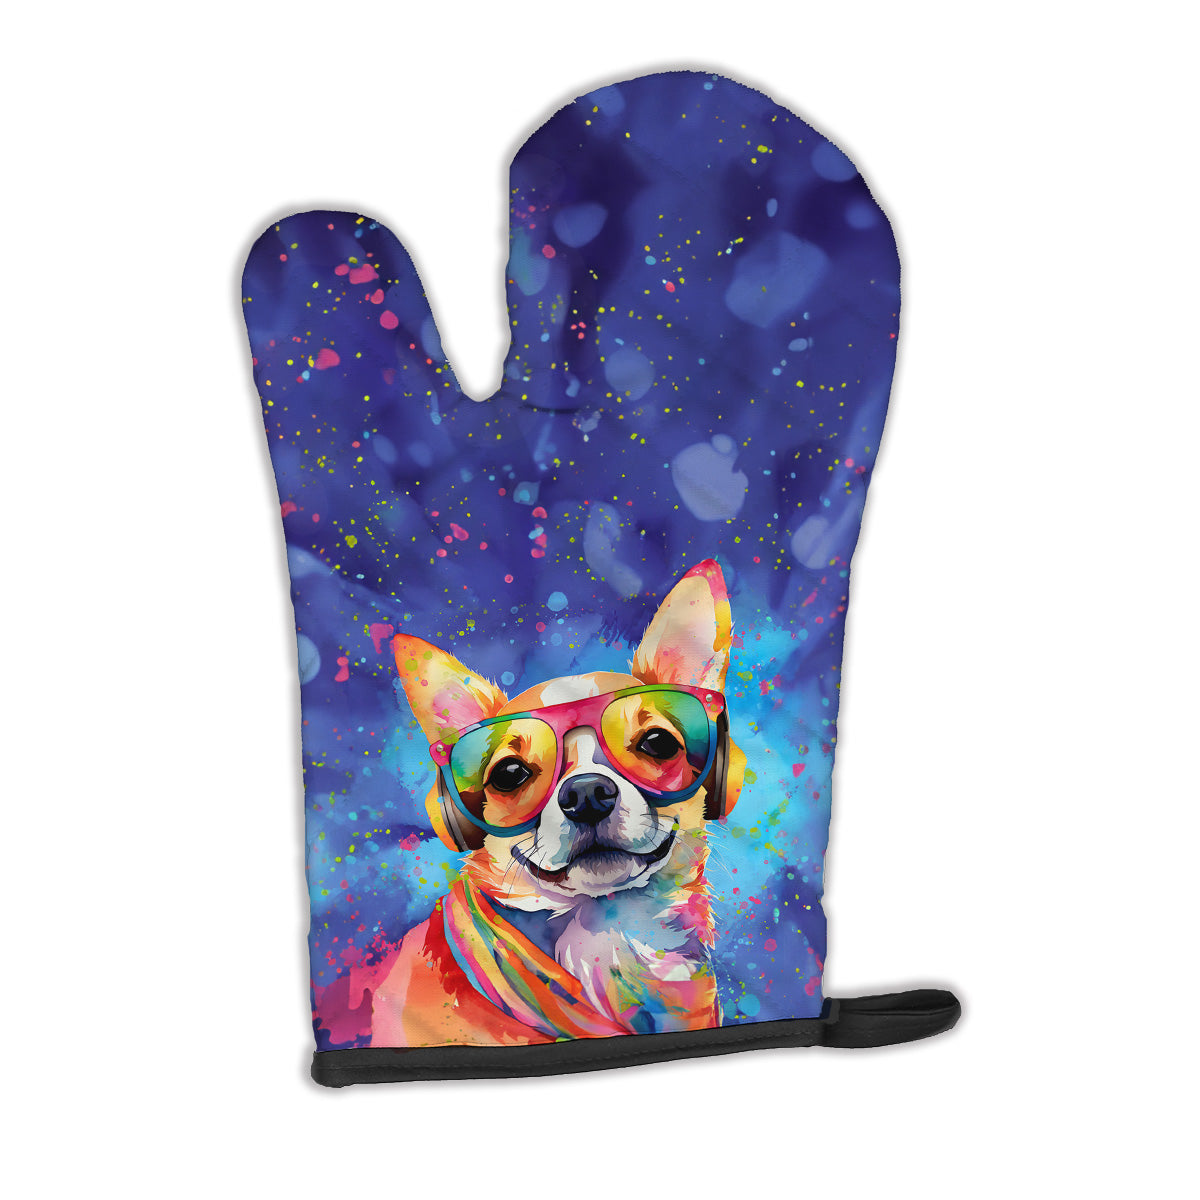 Buy this Chihuahua Hippie Dawg Oven Mitt